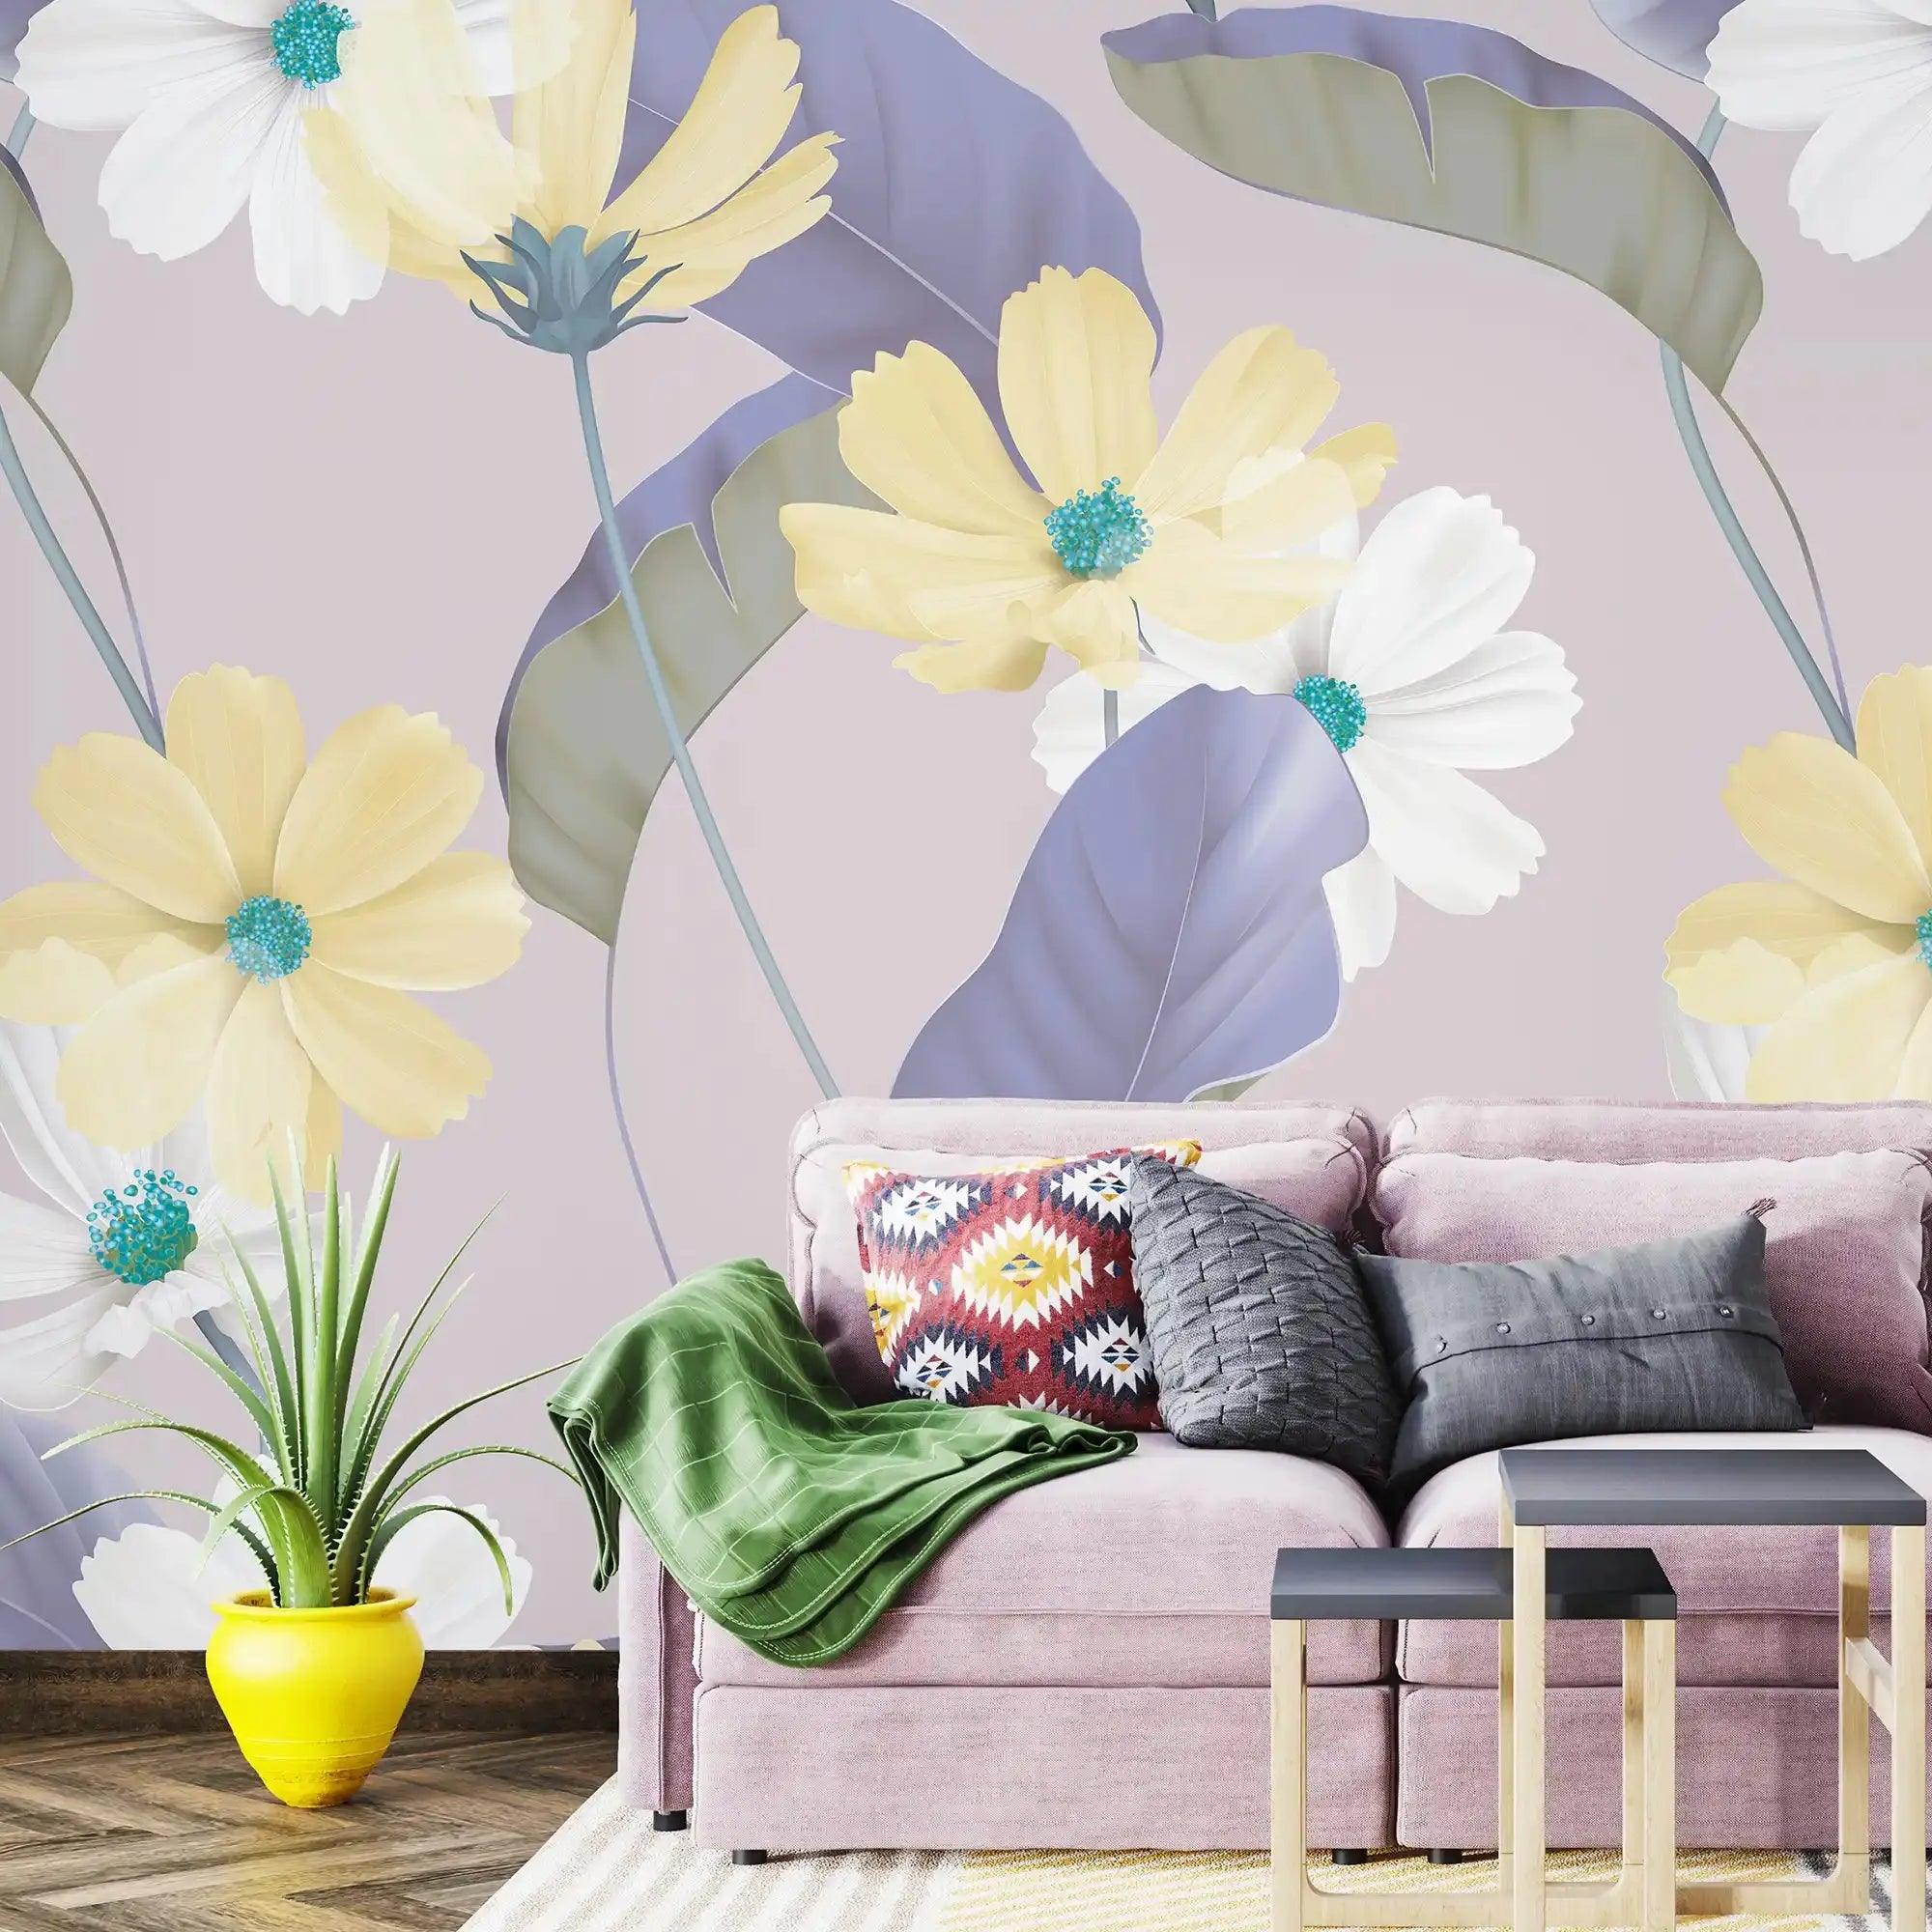 3080-C / Vibrant Boho Floral Wallpaper: Peel and Stick for Easy Application - Self Adhesive, Temporary Wall Mural for DIY Decor - Artevella